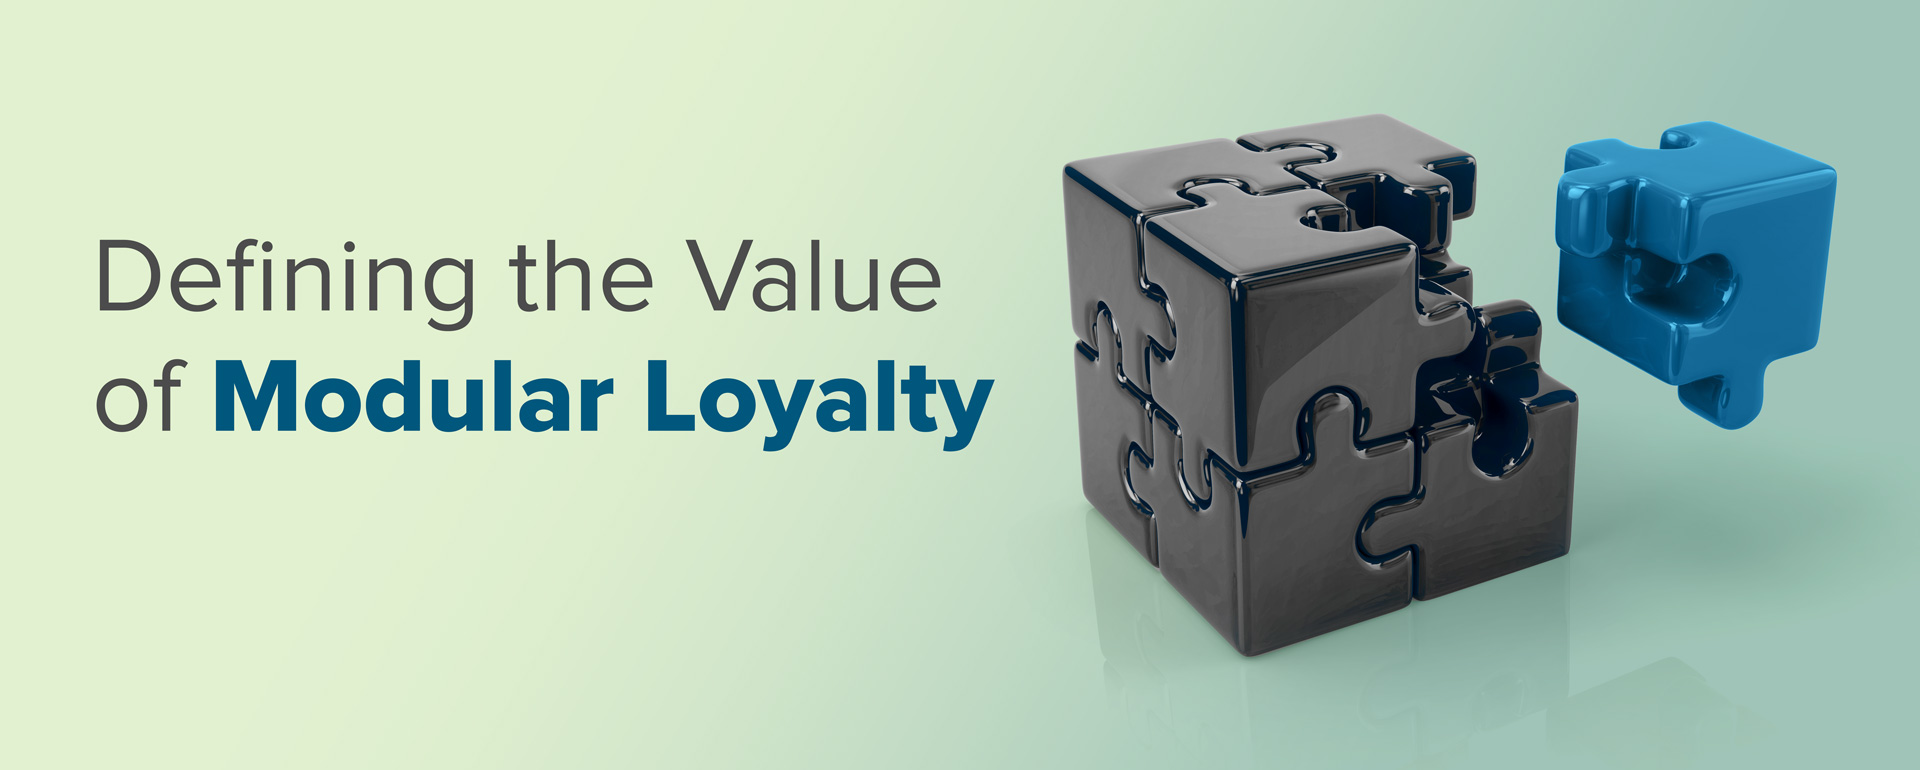 Defining the Value of Modular Loyalty